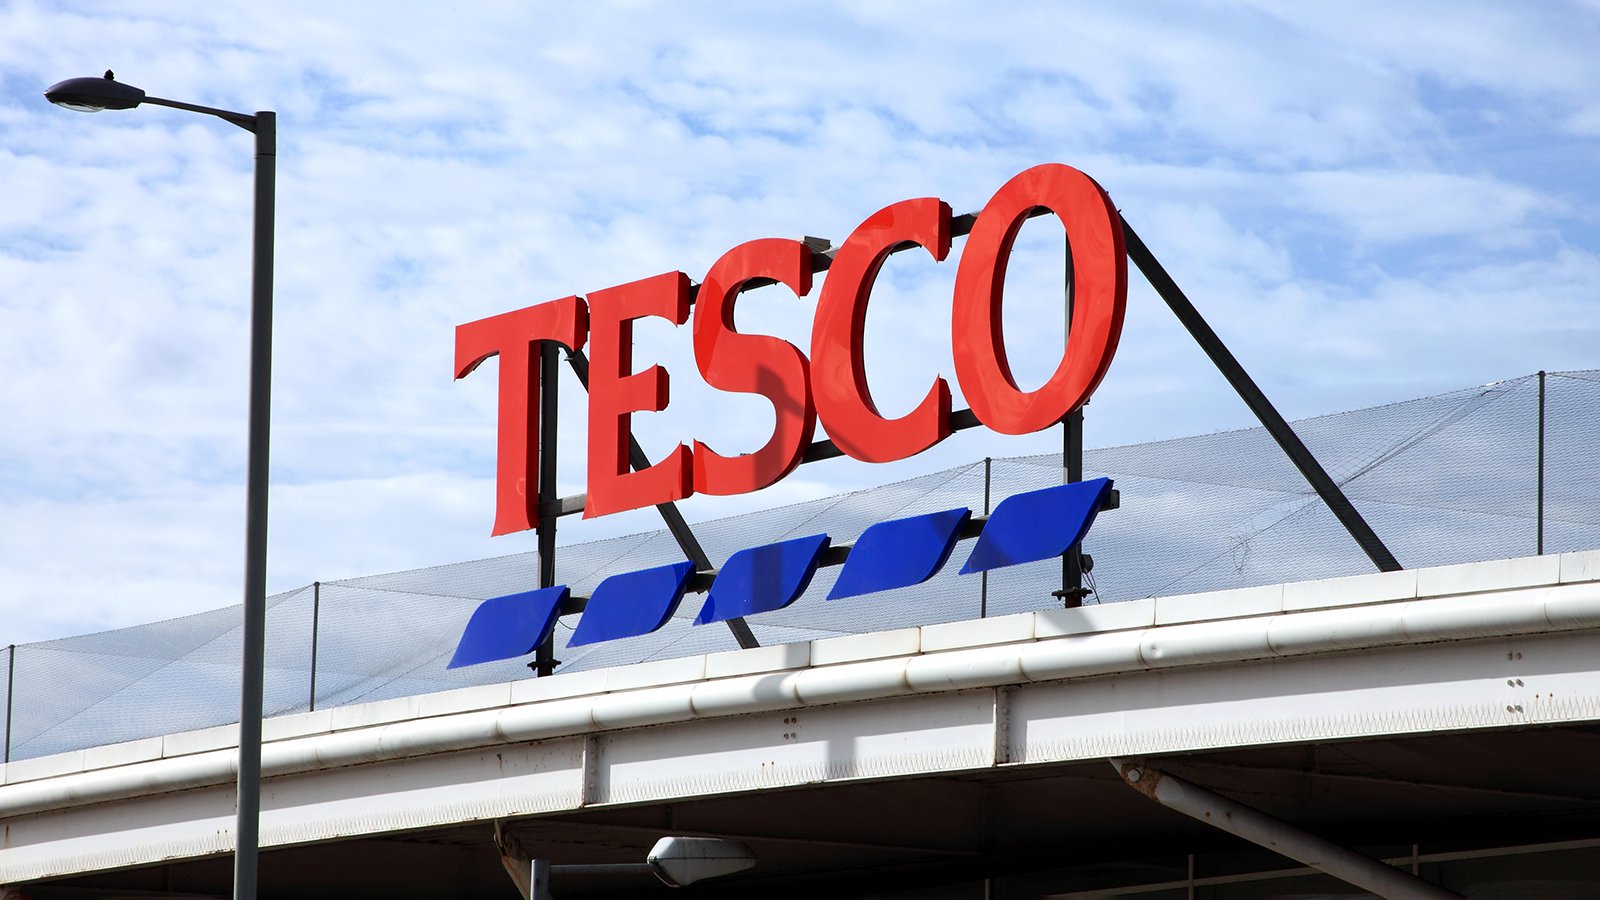 Tesco To Offer Plant-Based Alternative For Every Animal Product Sold, Says Leaked Letter